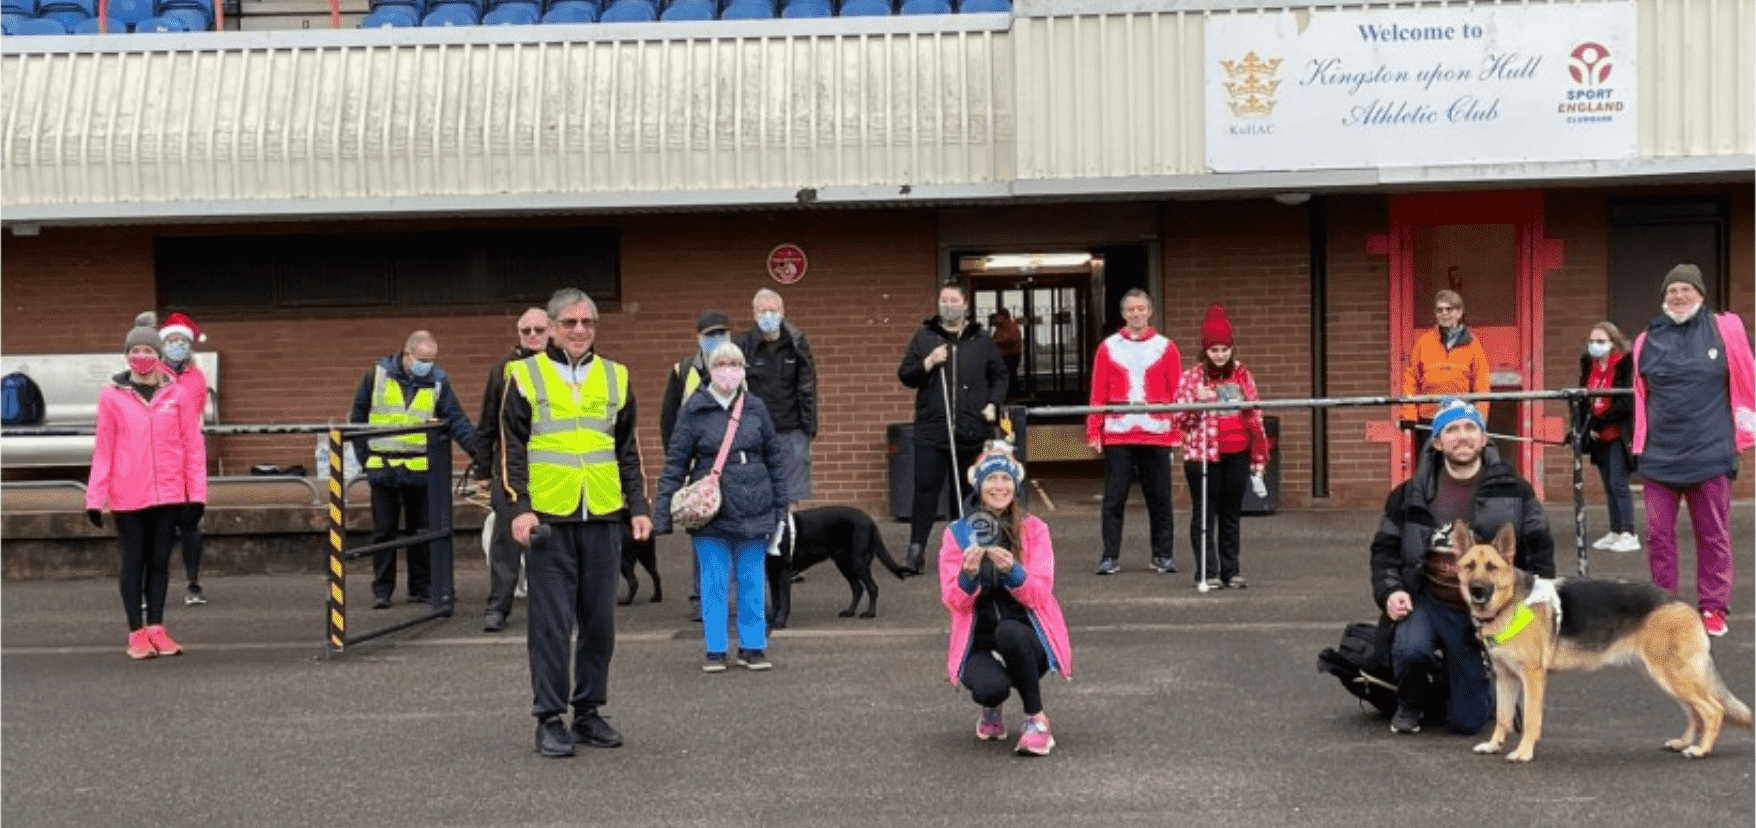 group picture of people with their guide dogs and walking canes